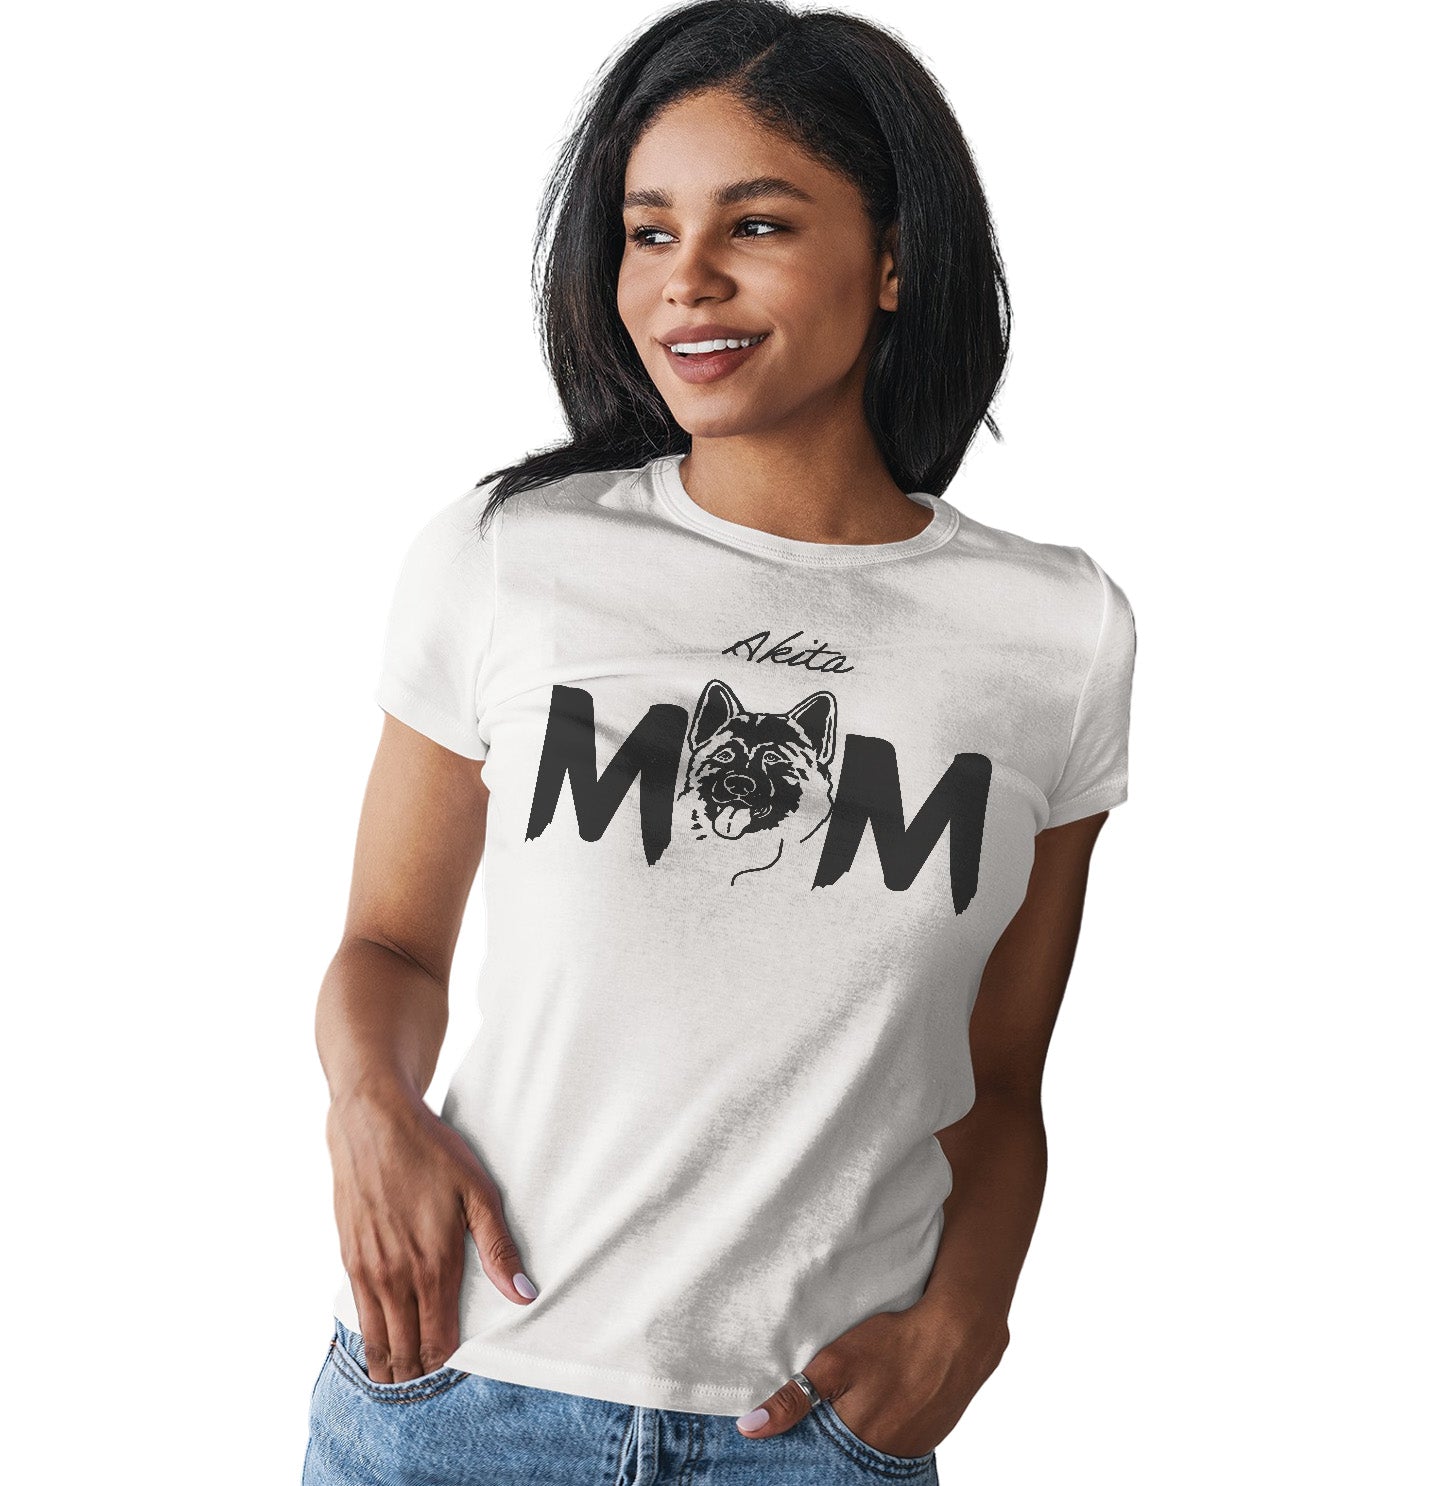 Akita Breed Mom - Women's Fitted T-Shirt